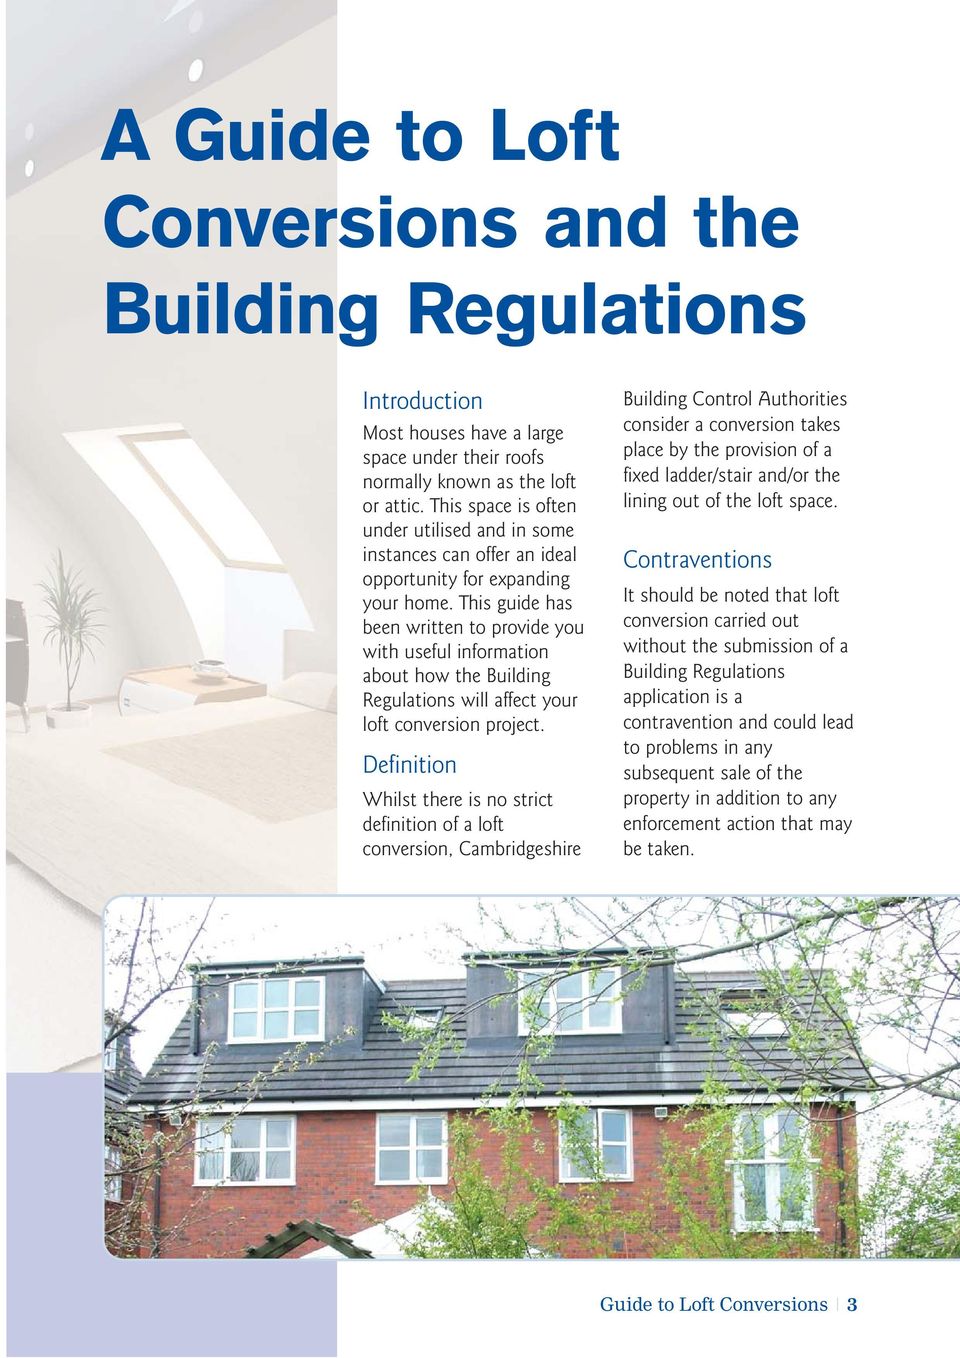 This guide has been written to provide you with useful information about how the Building Regulations will affect your loft conversion project.